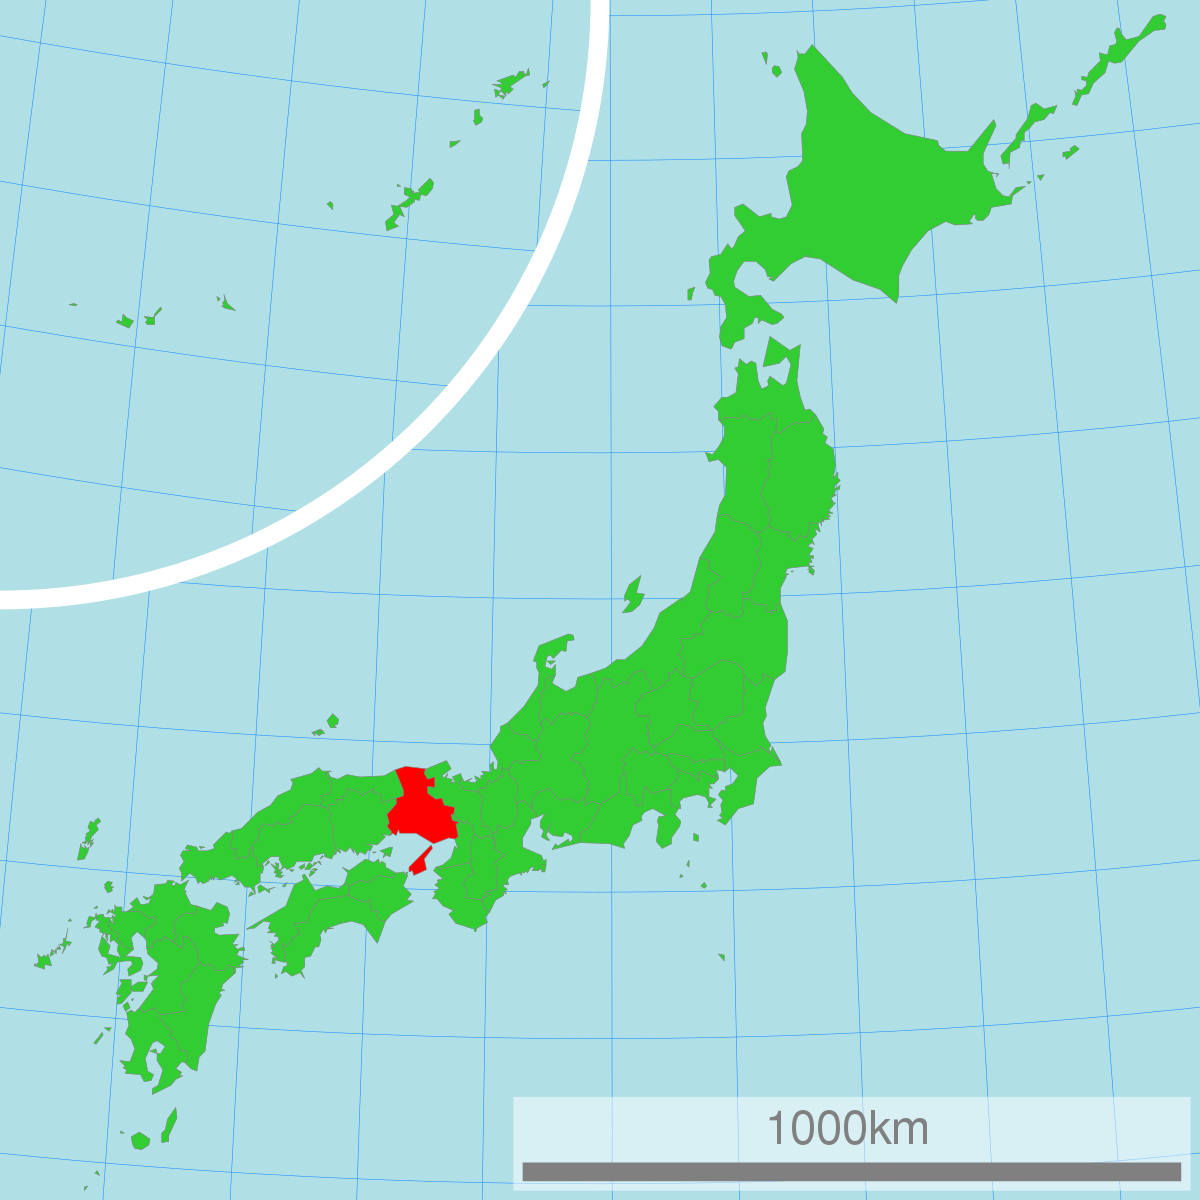 The Hyogo county is home to Kobe